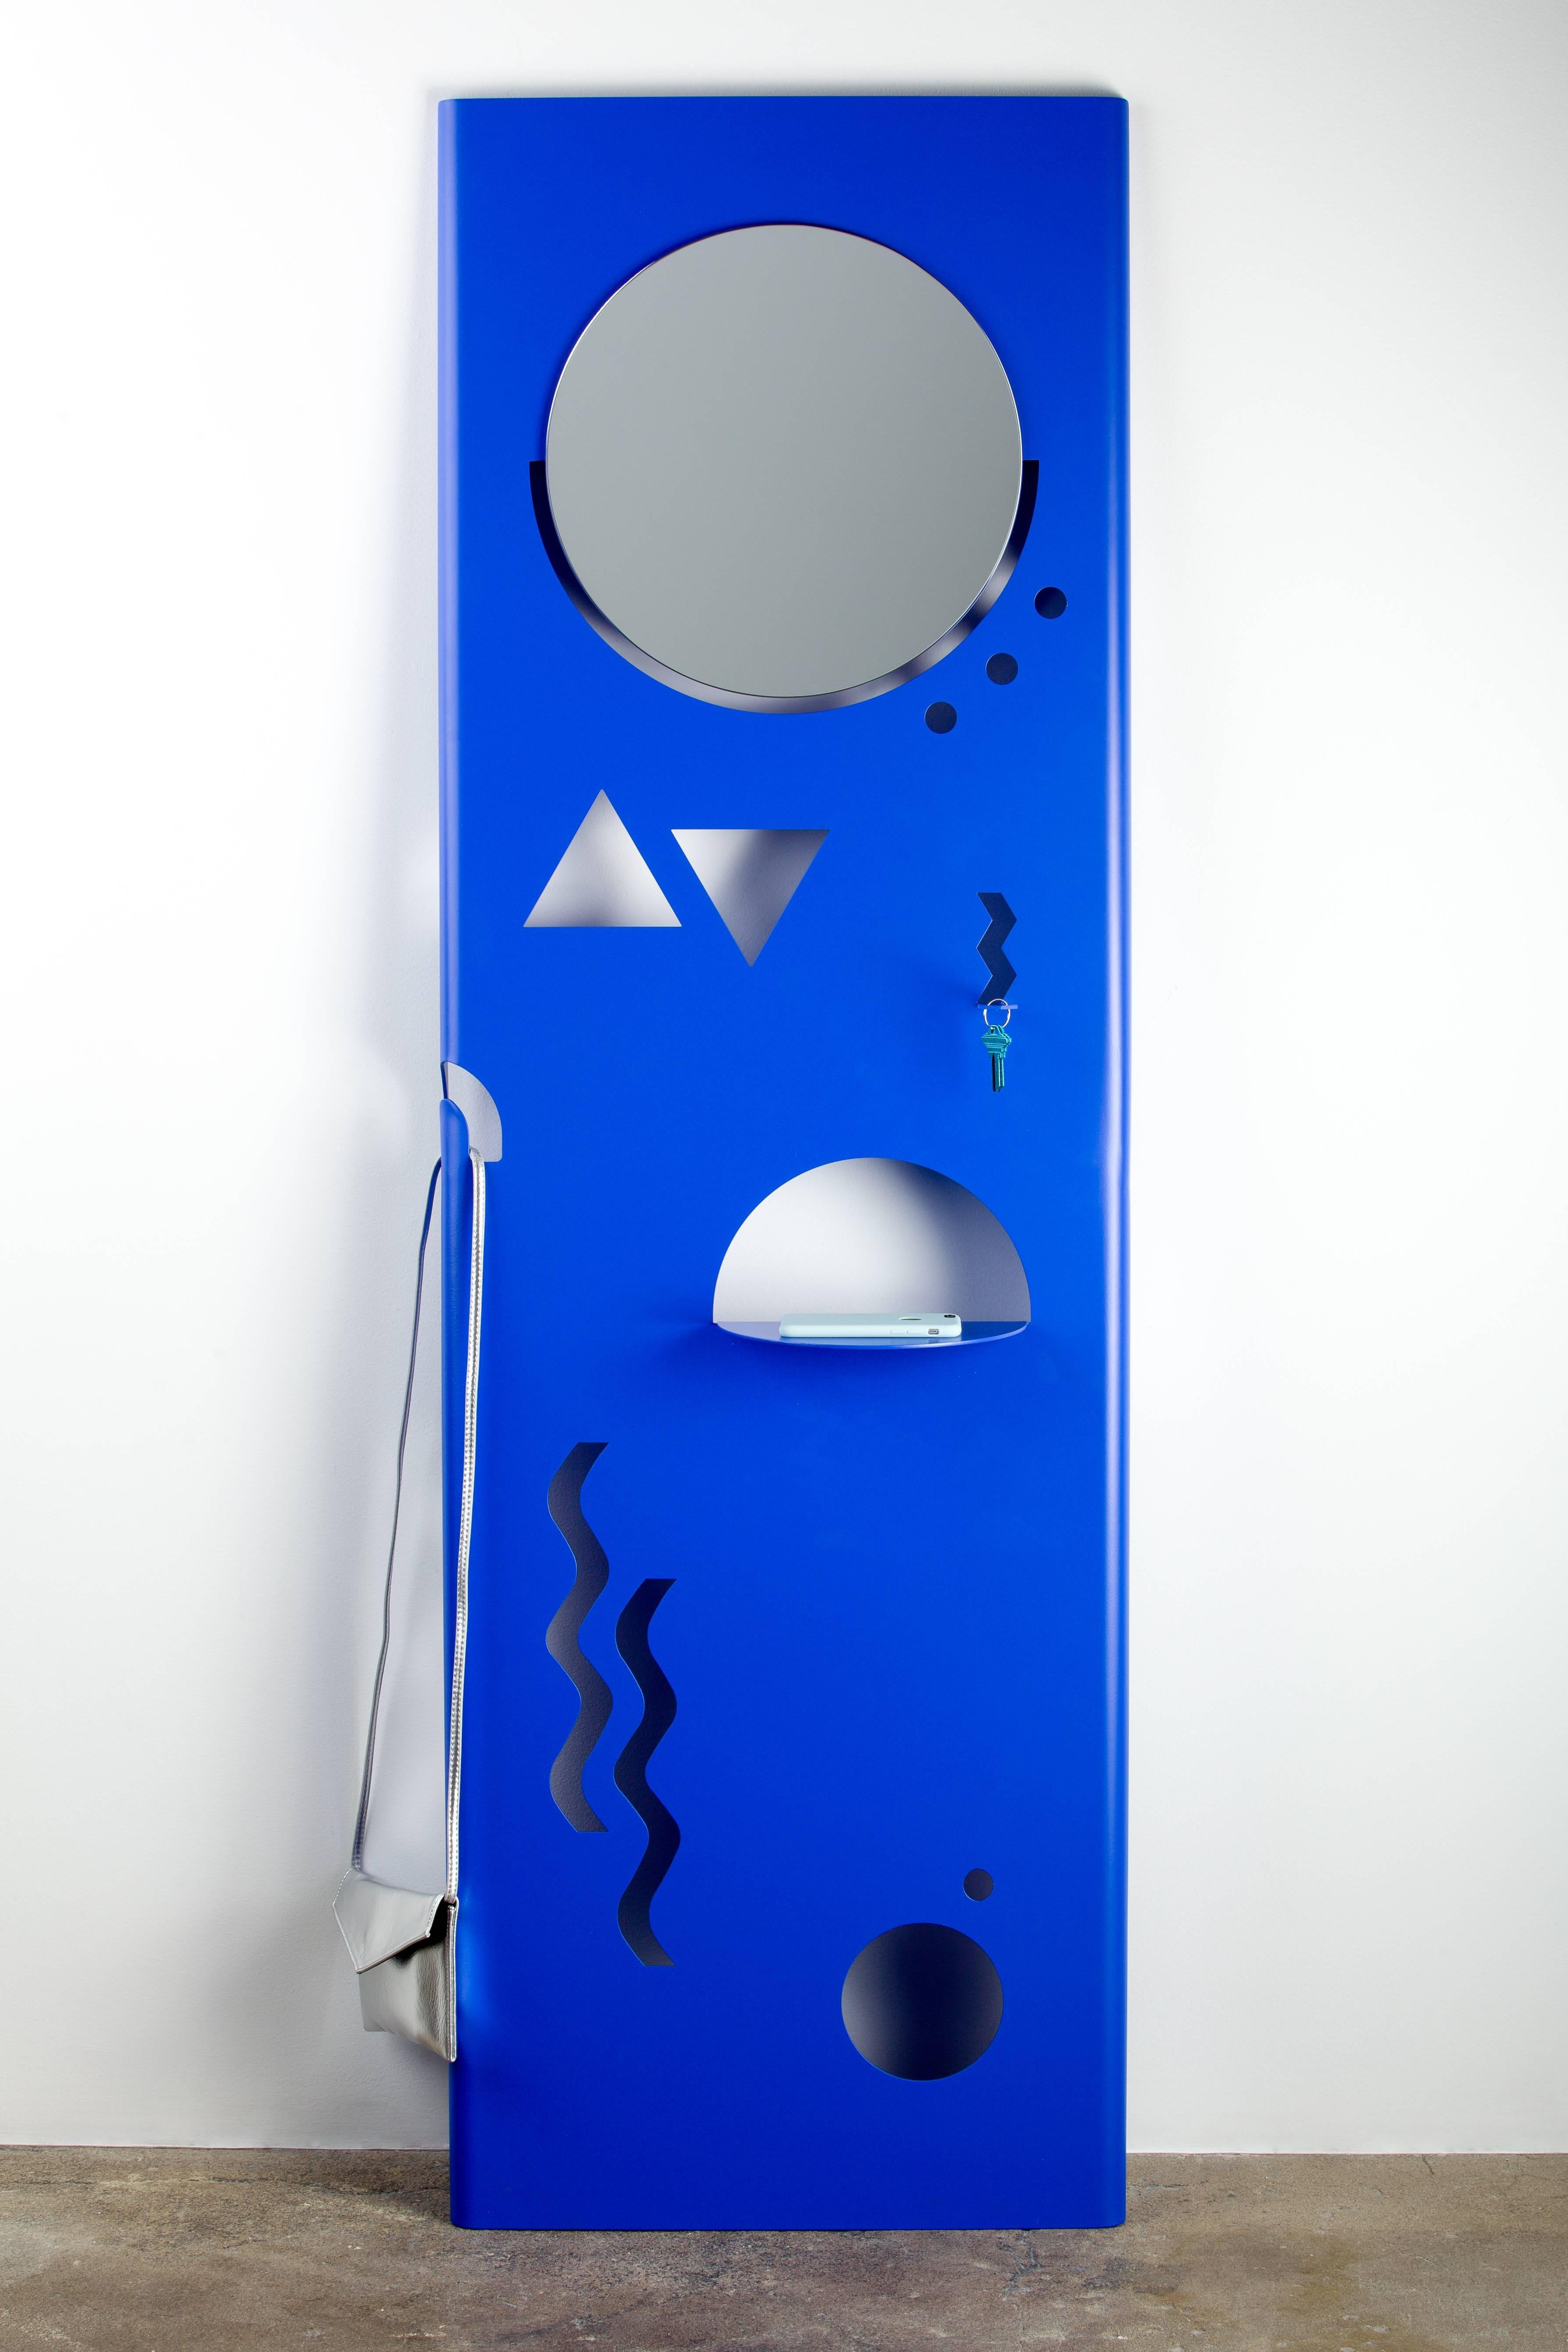 Inspired by Memphis shapes, Just Cant was developed as an abstract interpretation of what a valet can be. With a mirror, key hook, coat hook and shelf, Just Cant functions entirely the way a valet needs to function, without looking like any valet